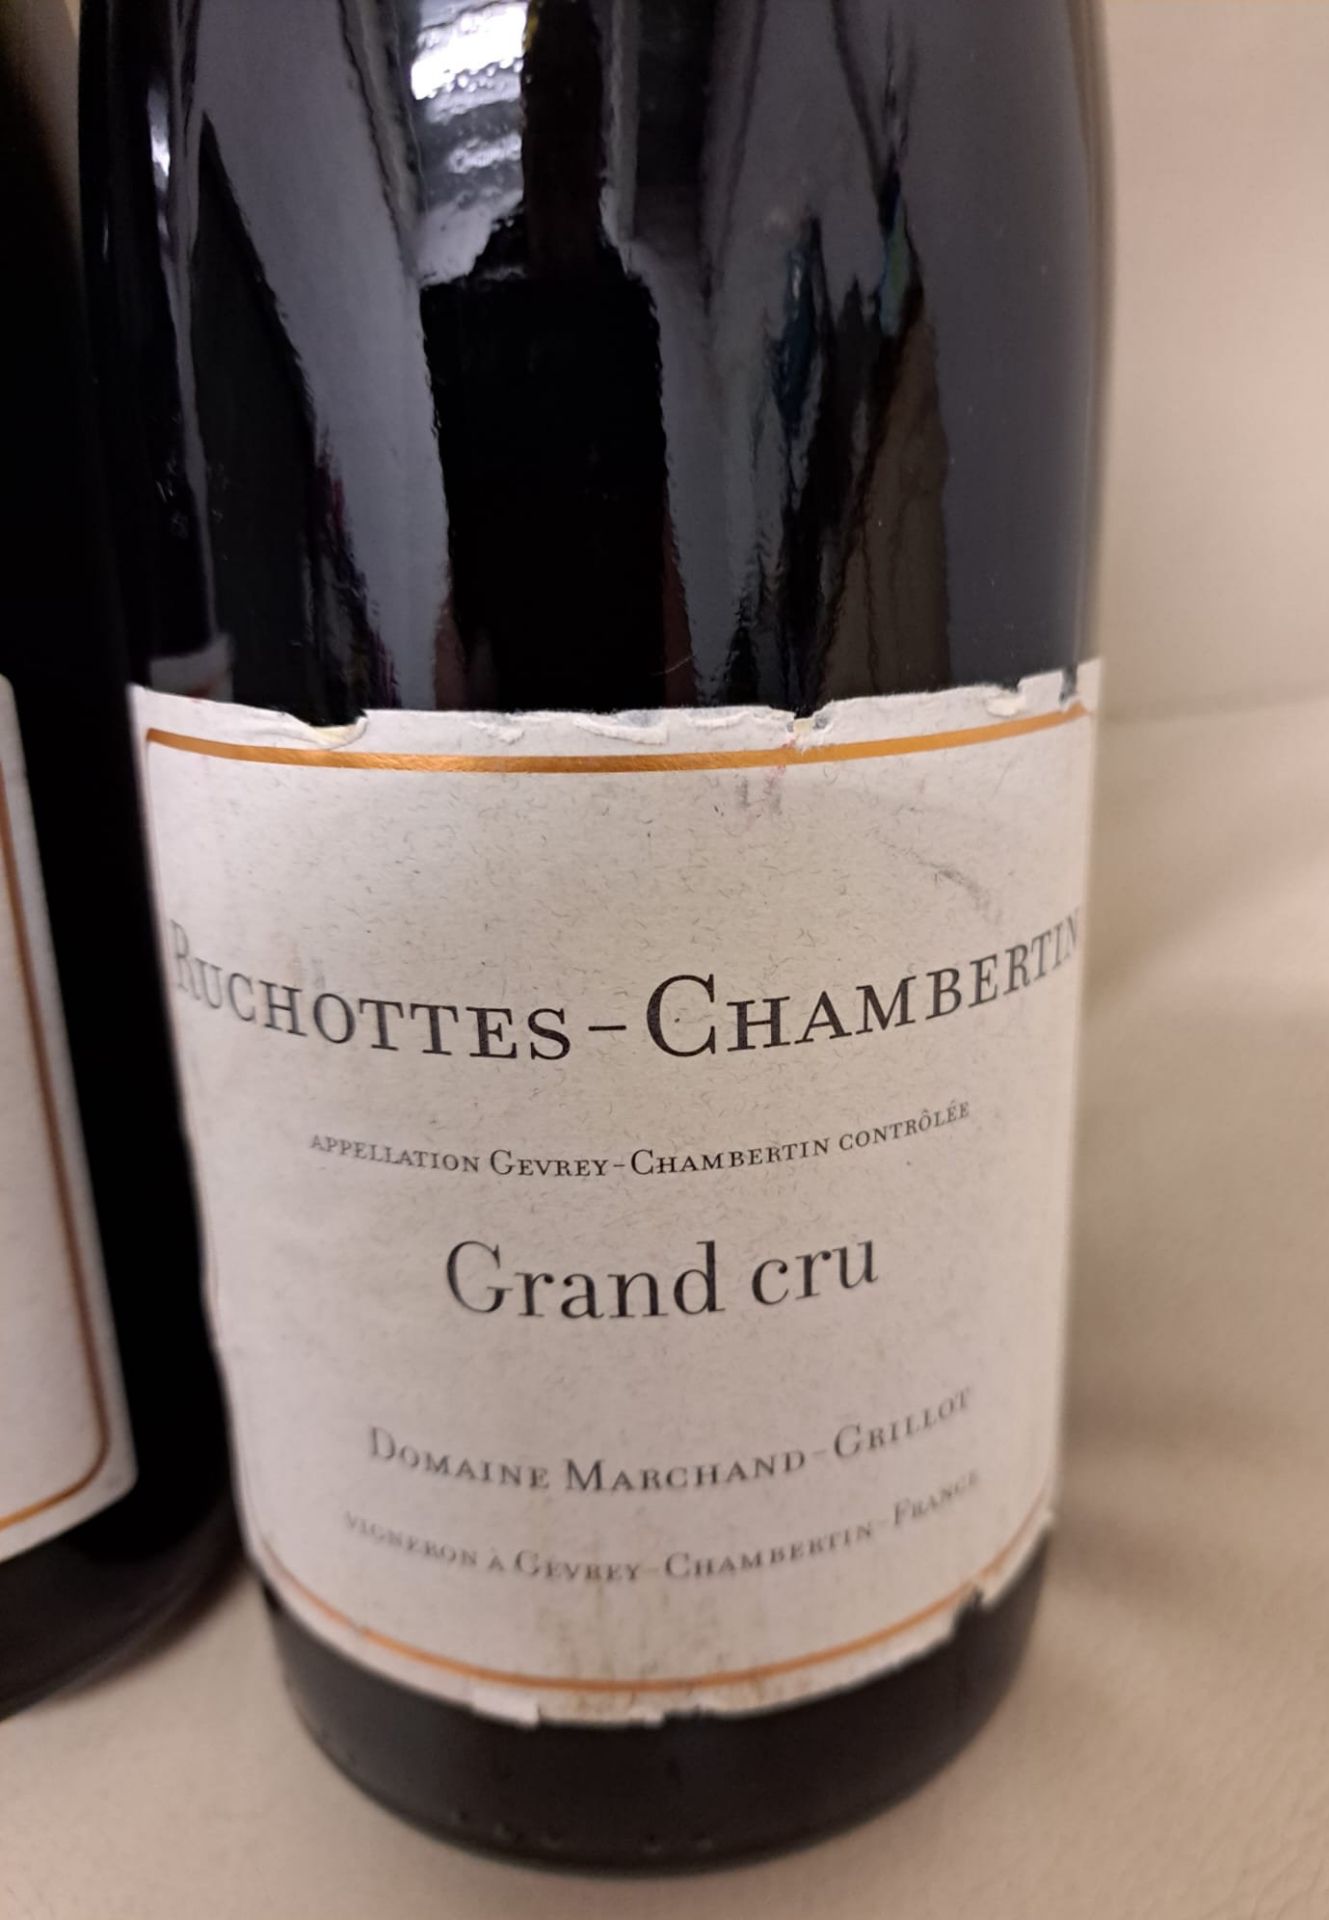 1 x Bottle of 2017 Ruchottes - Chambertin Grand Cru Domaine Marchand - Grillot - Red Wine - Retail - Image 2 of 2